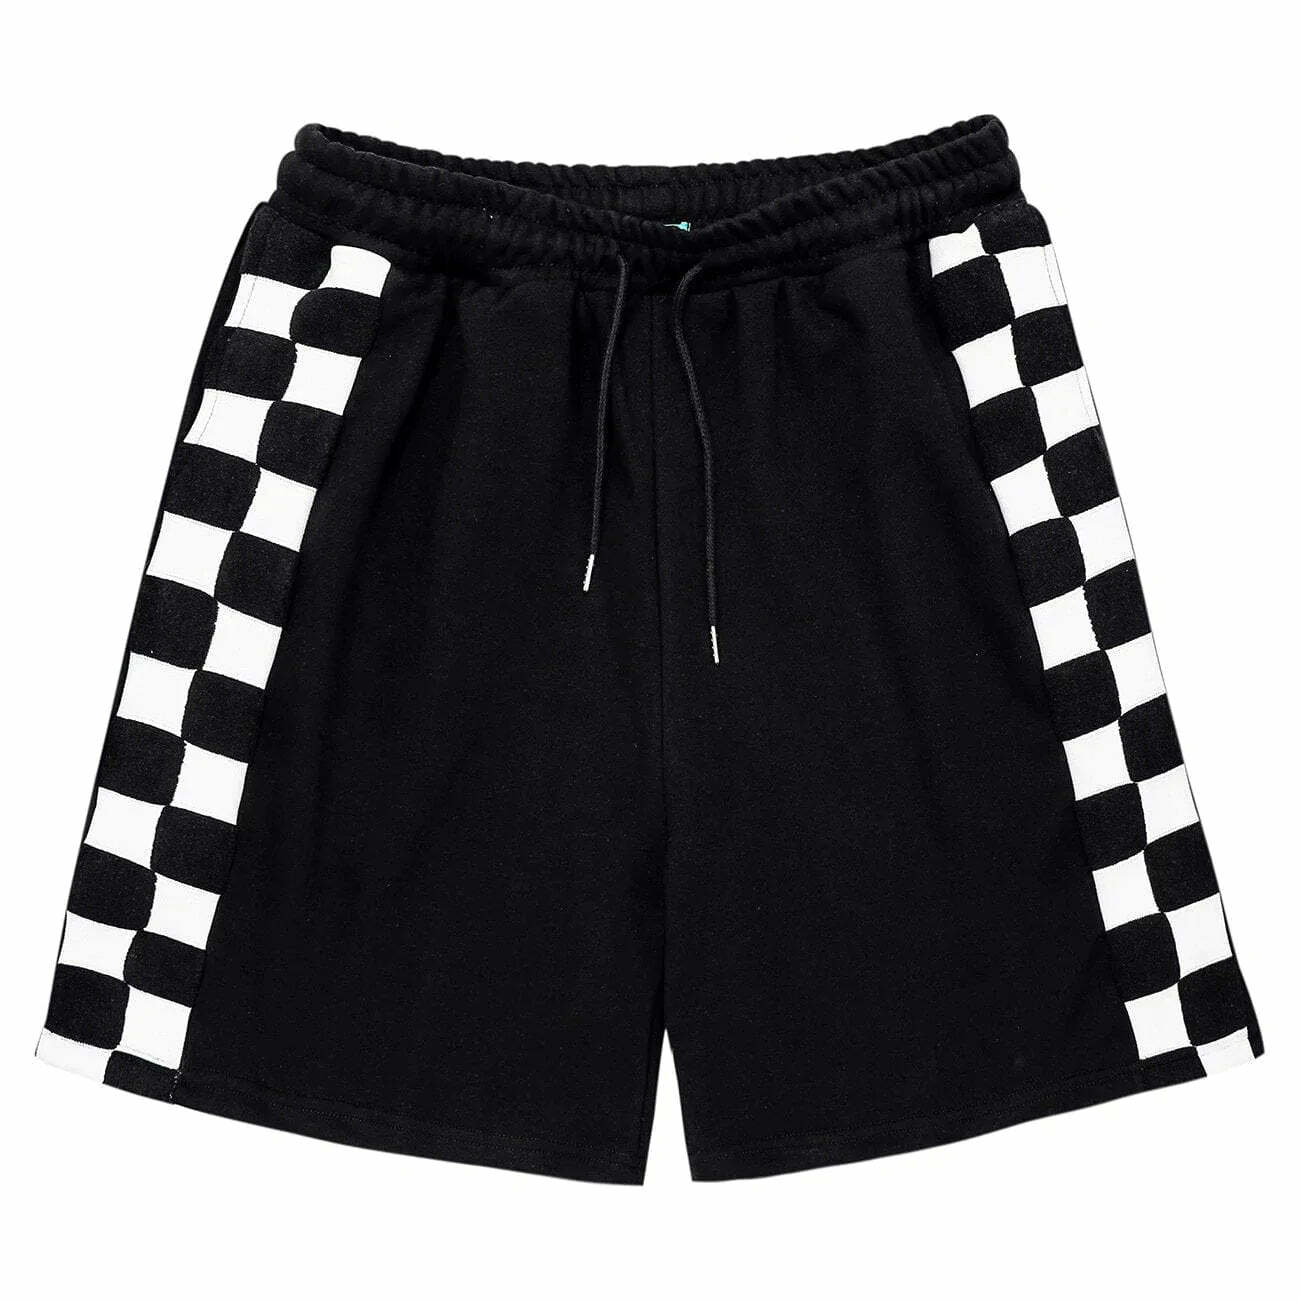 checkered patchwork splicing shorts edgy streetwear essential 5264